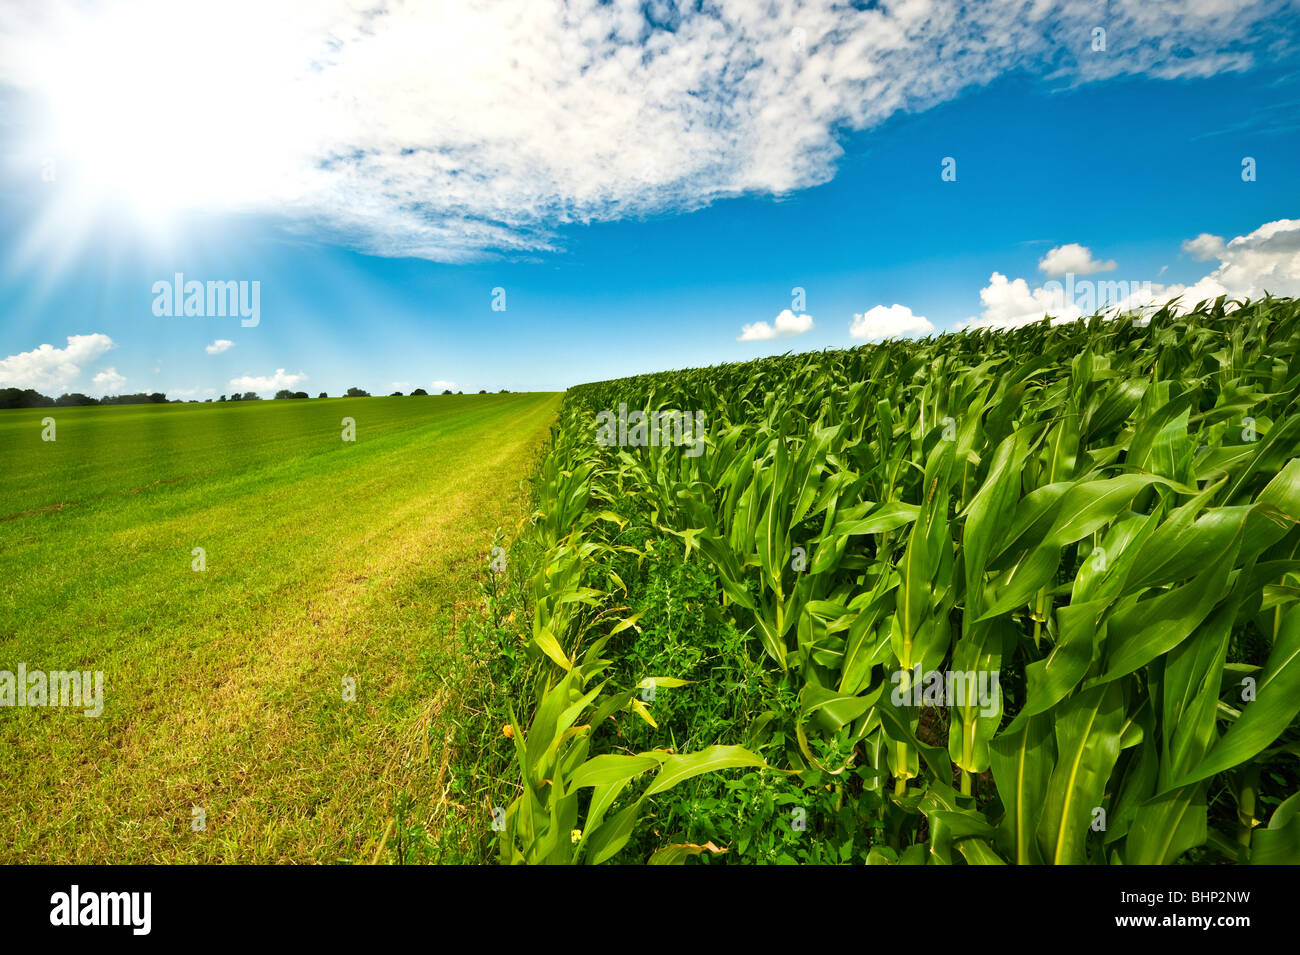 Farmland in summer with fresh green grass, corn field and bright blue sky Stock Photo